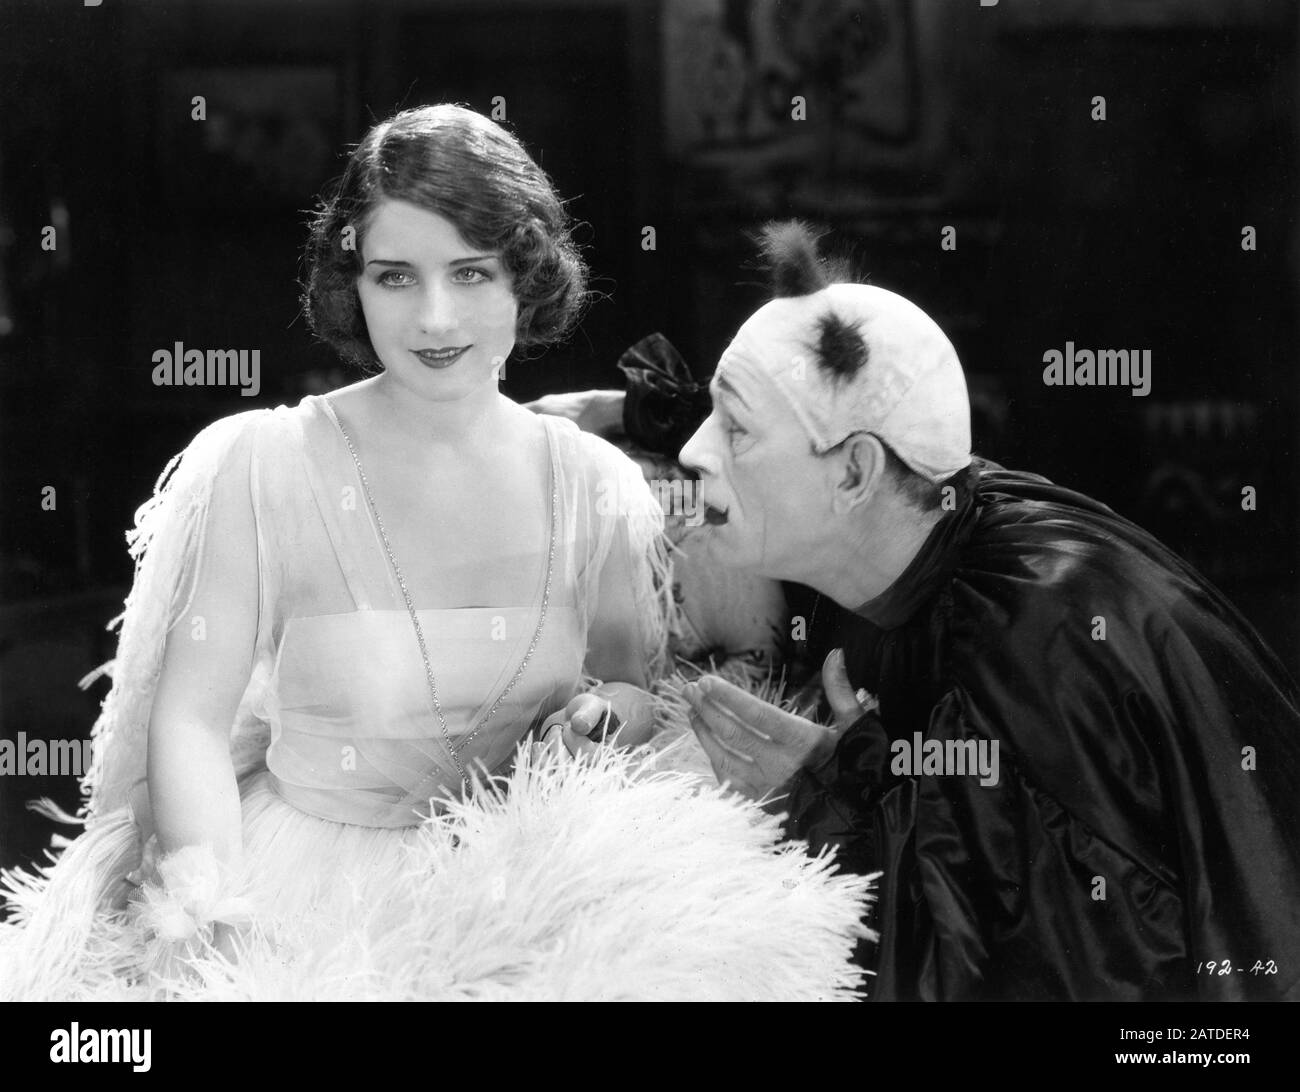 NORMA SHEARER and LON CHANEY in HE WHO GETS SLAPPED 1924 director VICTOR SEASTROM / SJOSTROM from play by Leonid Andreyev Silent movie producer LOUIS B. MAYER Metro - Goldwyn Pictures Corporation Stock Photo